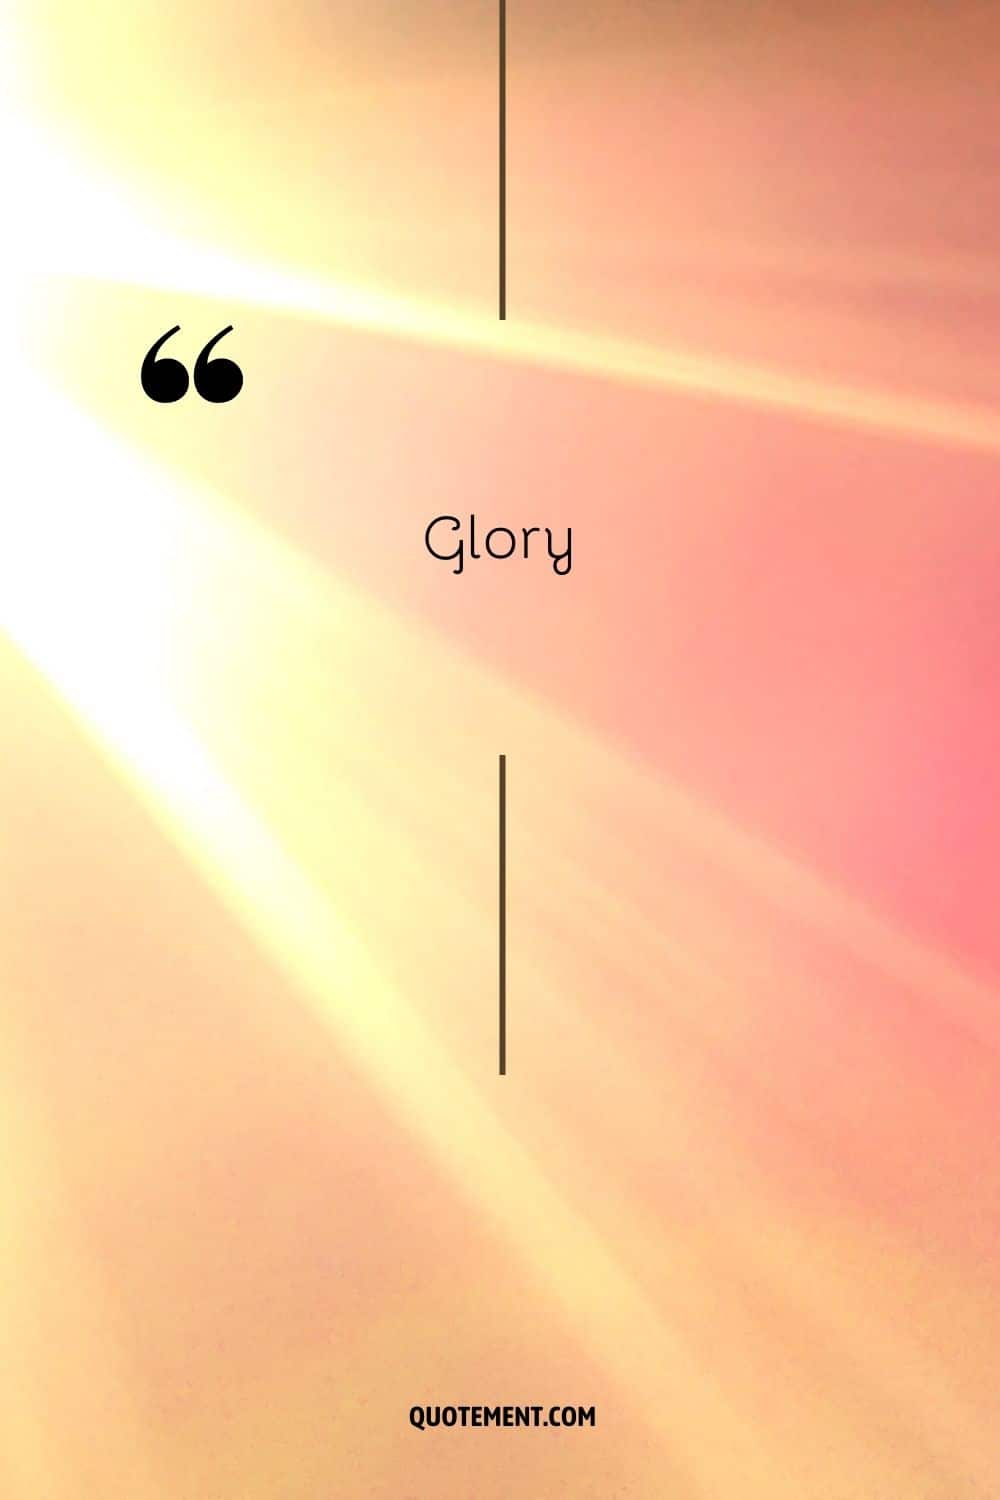 rays of the sun representing the word glory